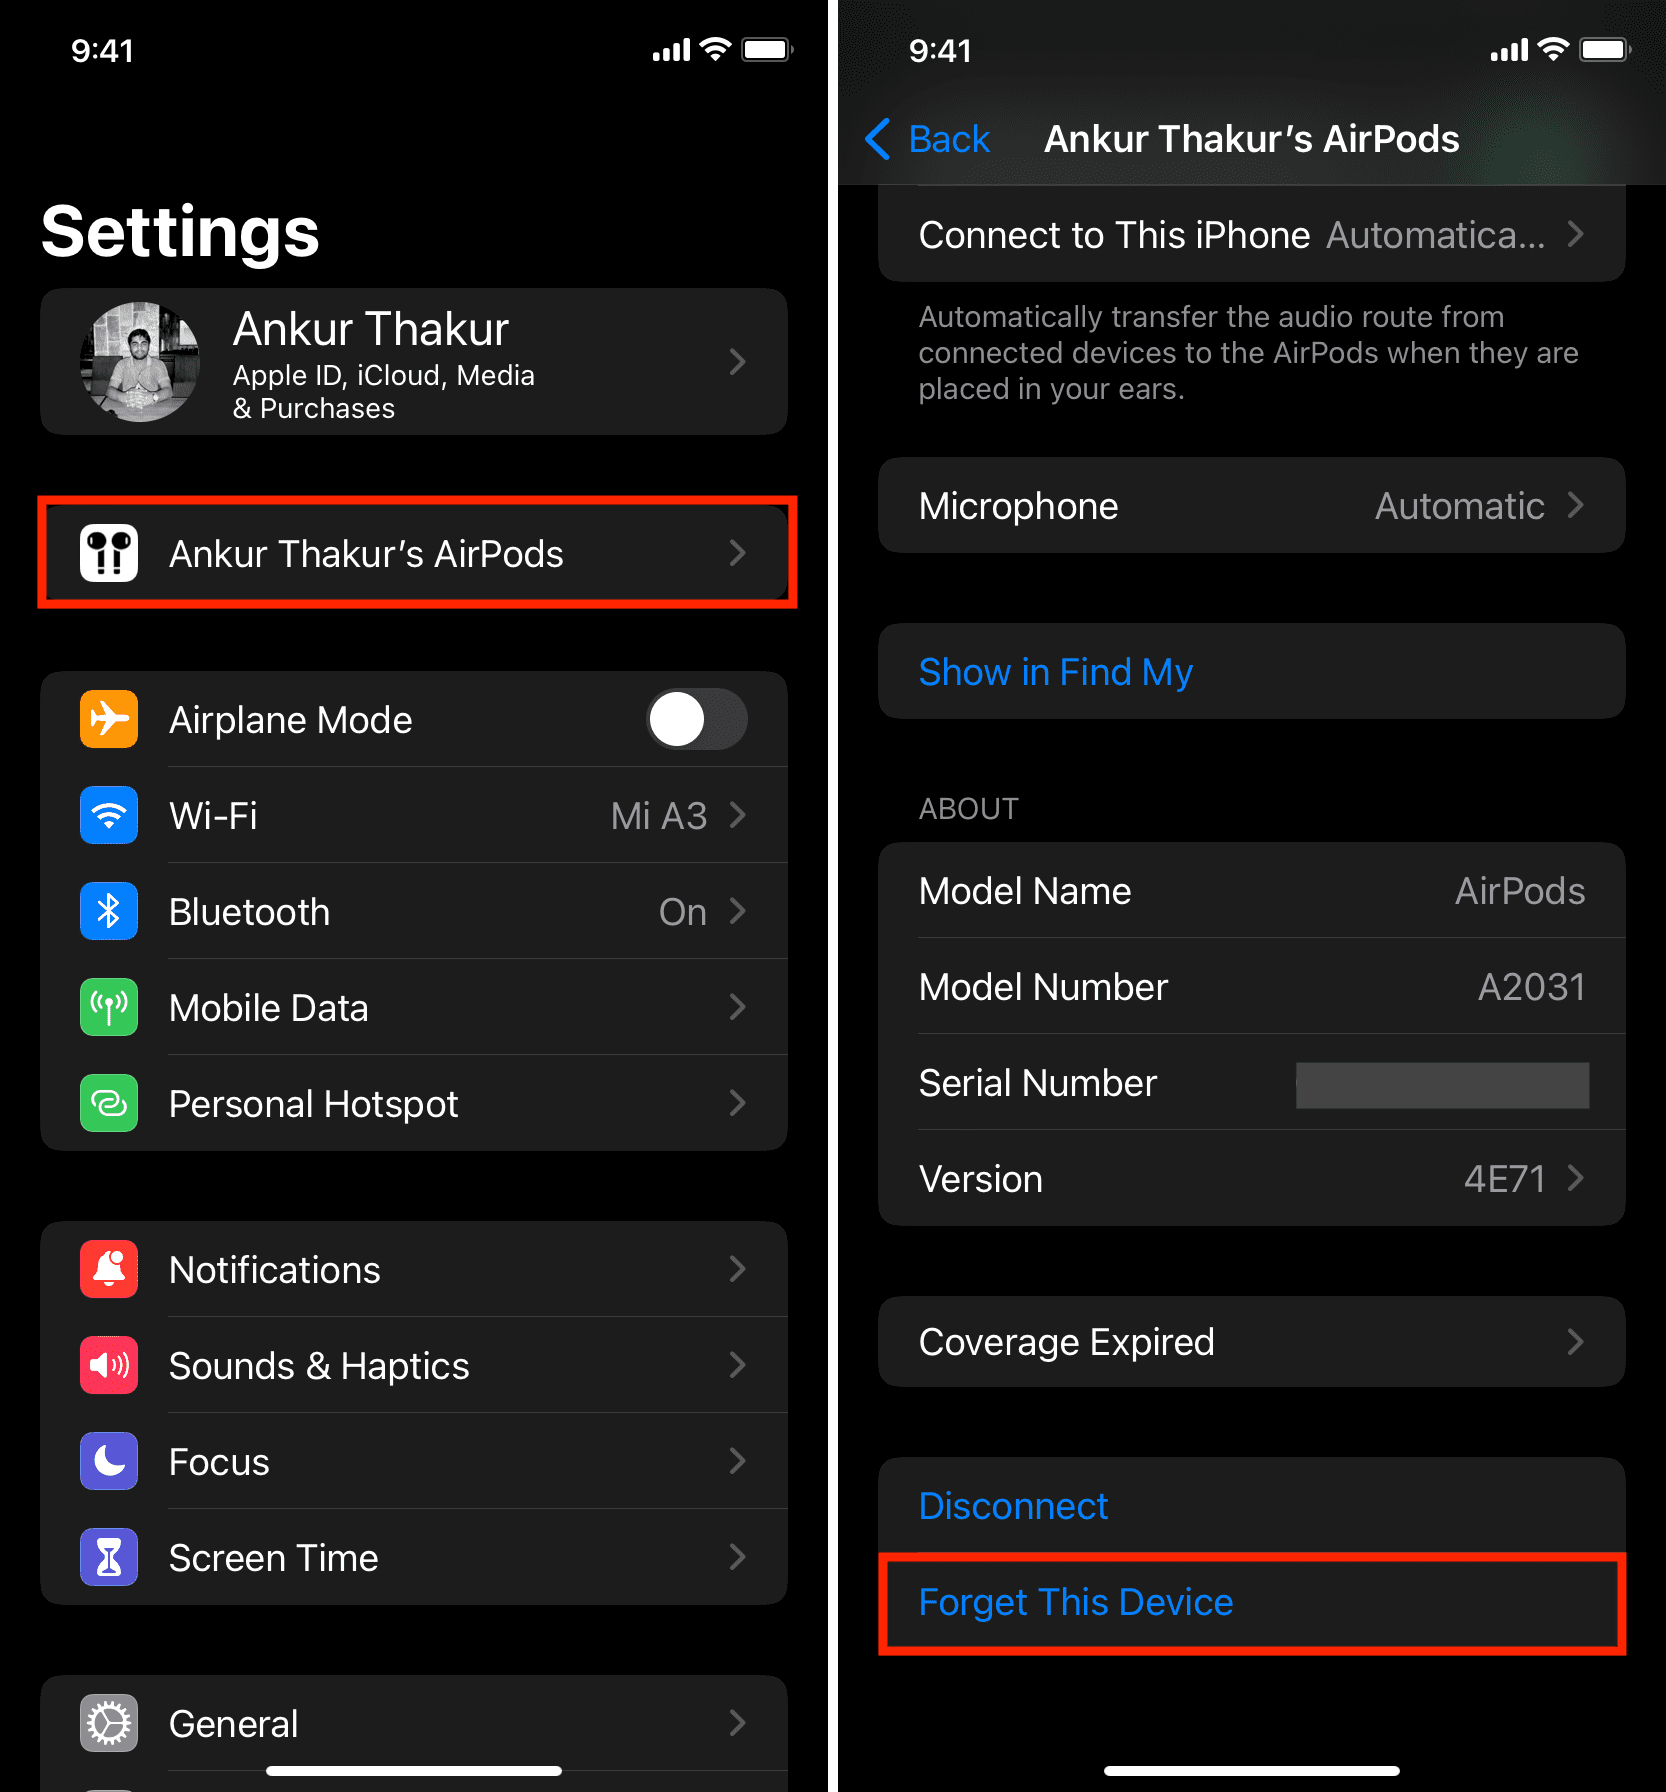 Forget AirPods from iPhone Settings app